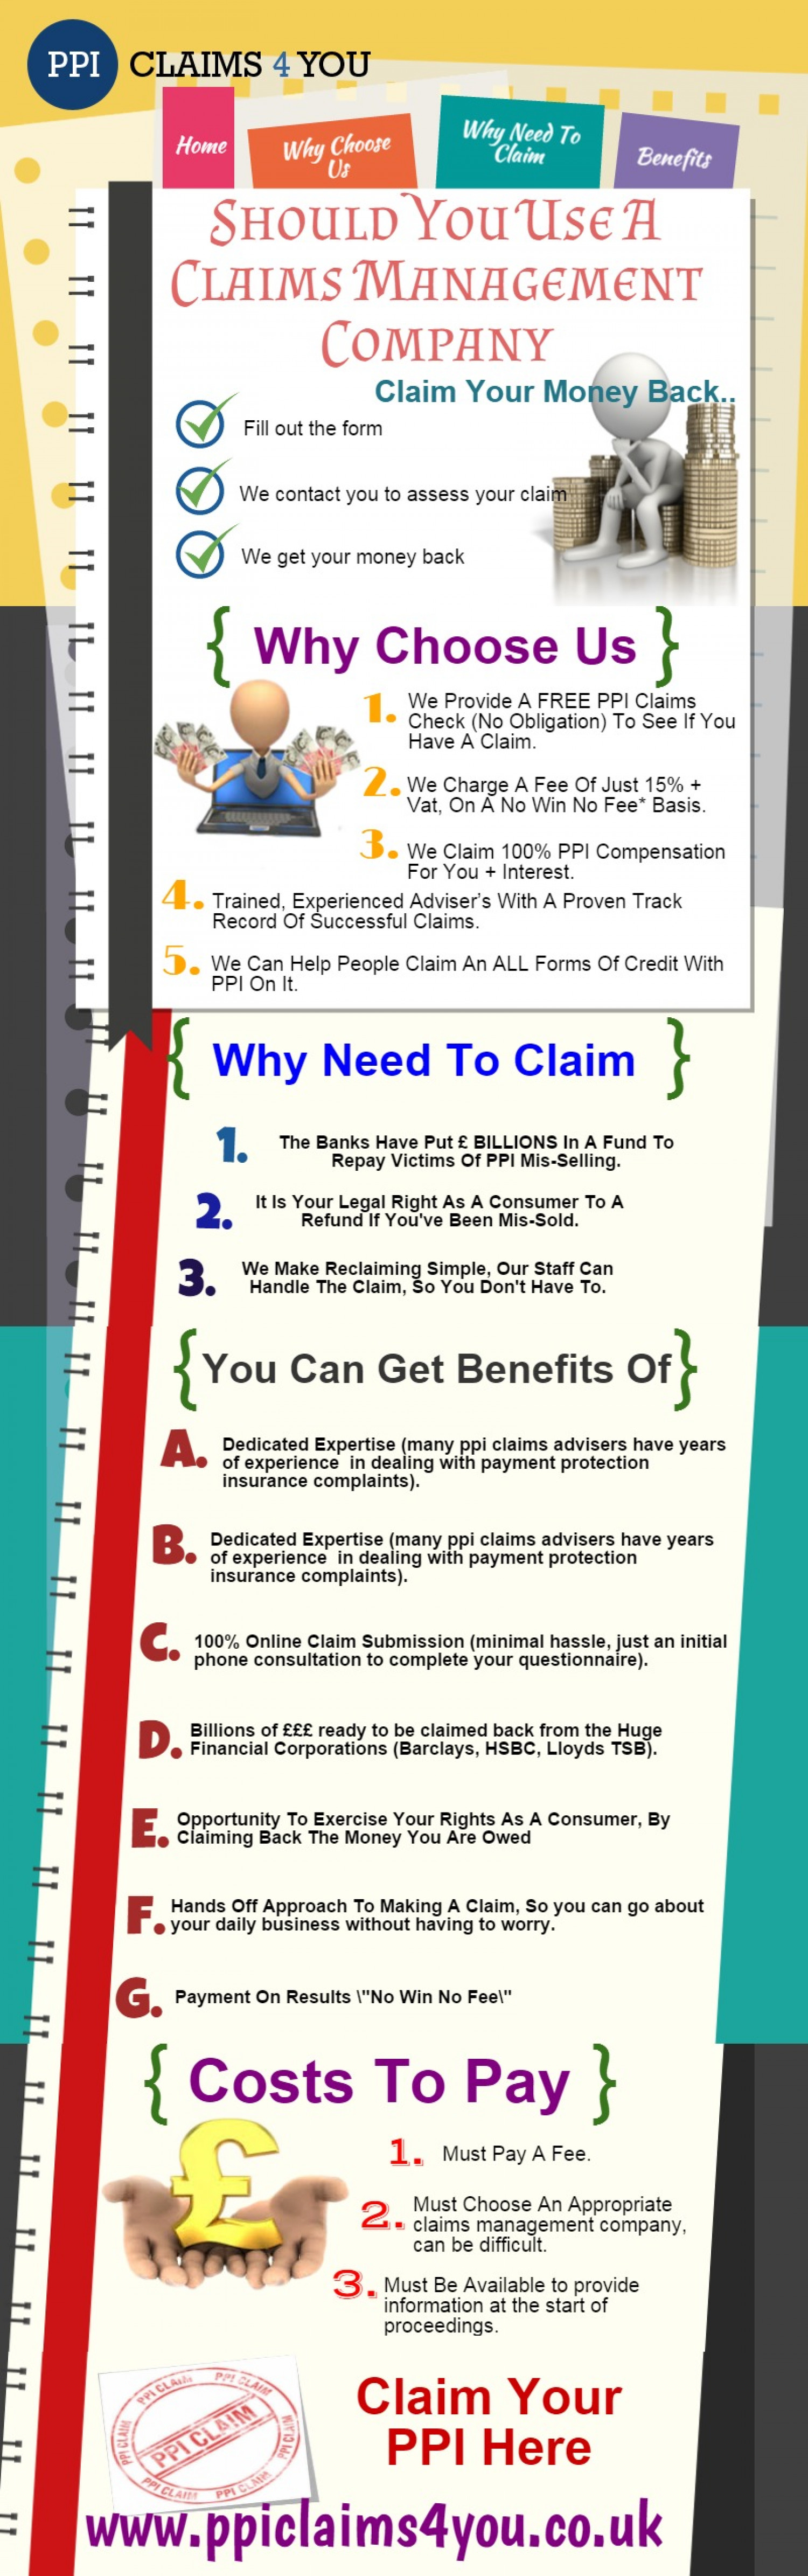 Should You Use A Claims Management Company? Infographic